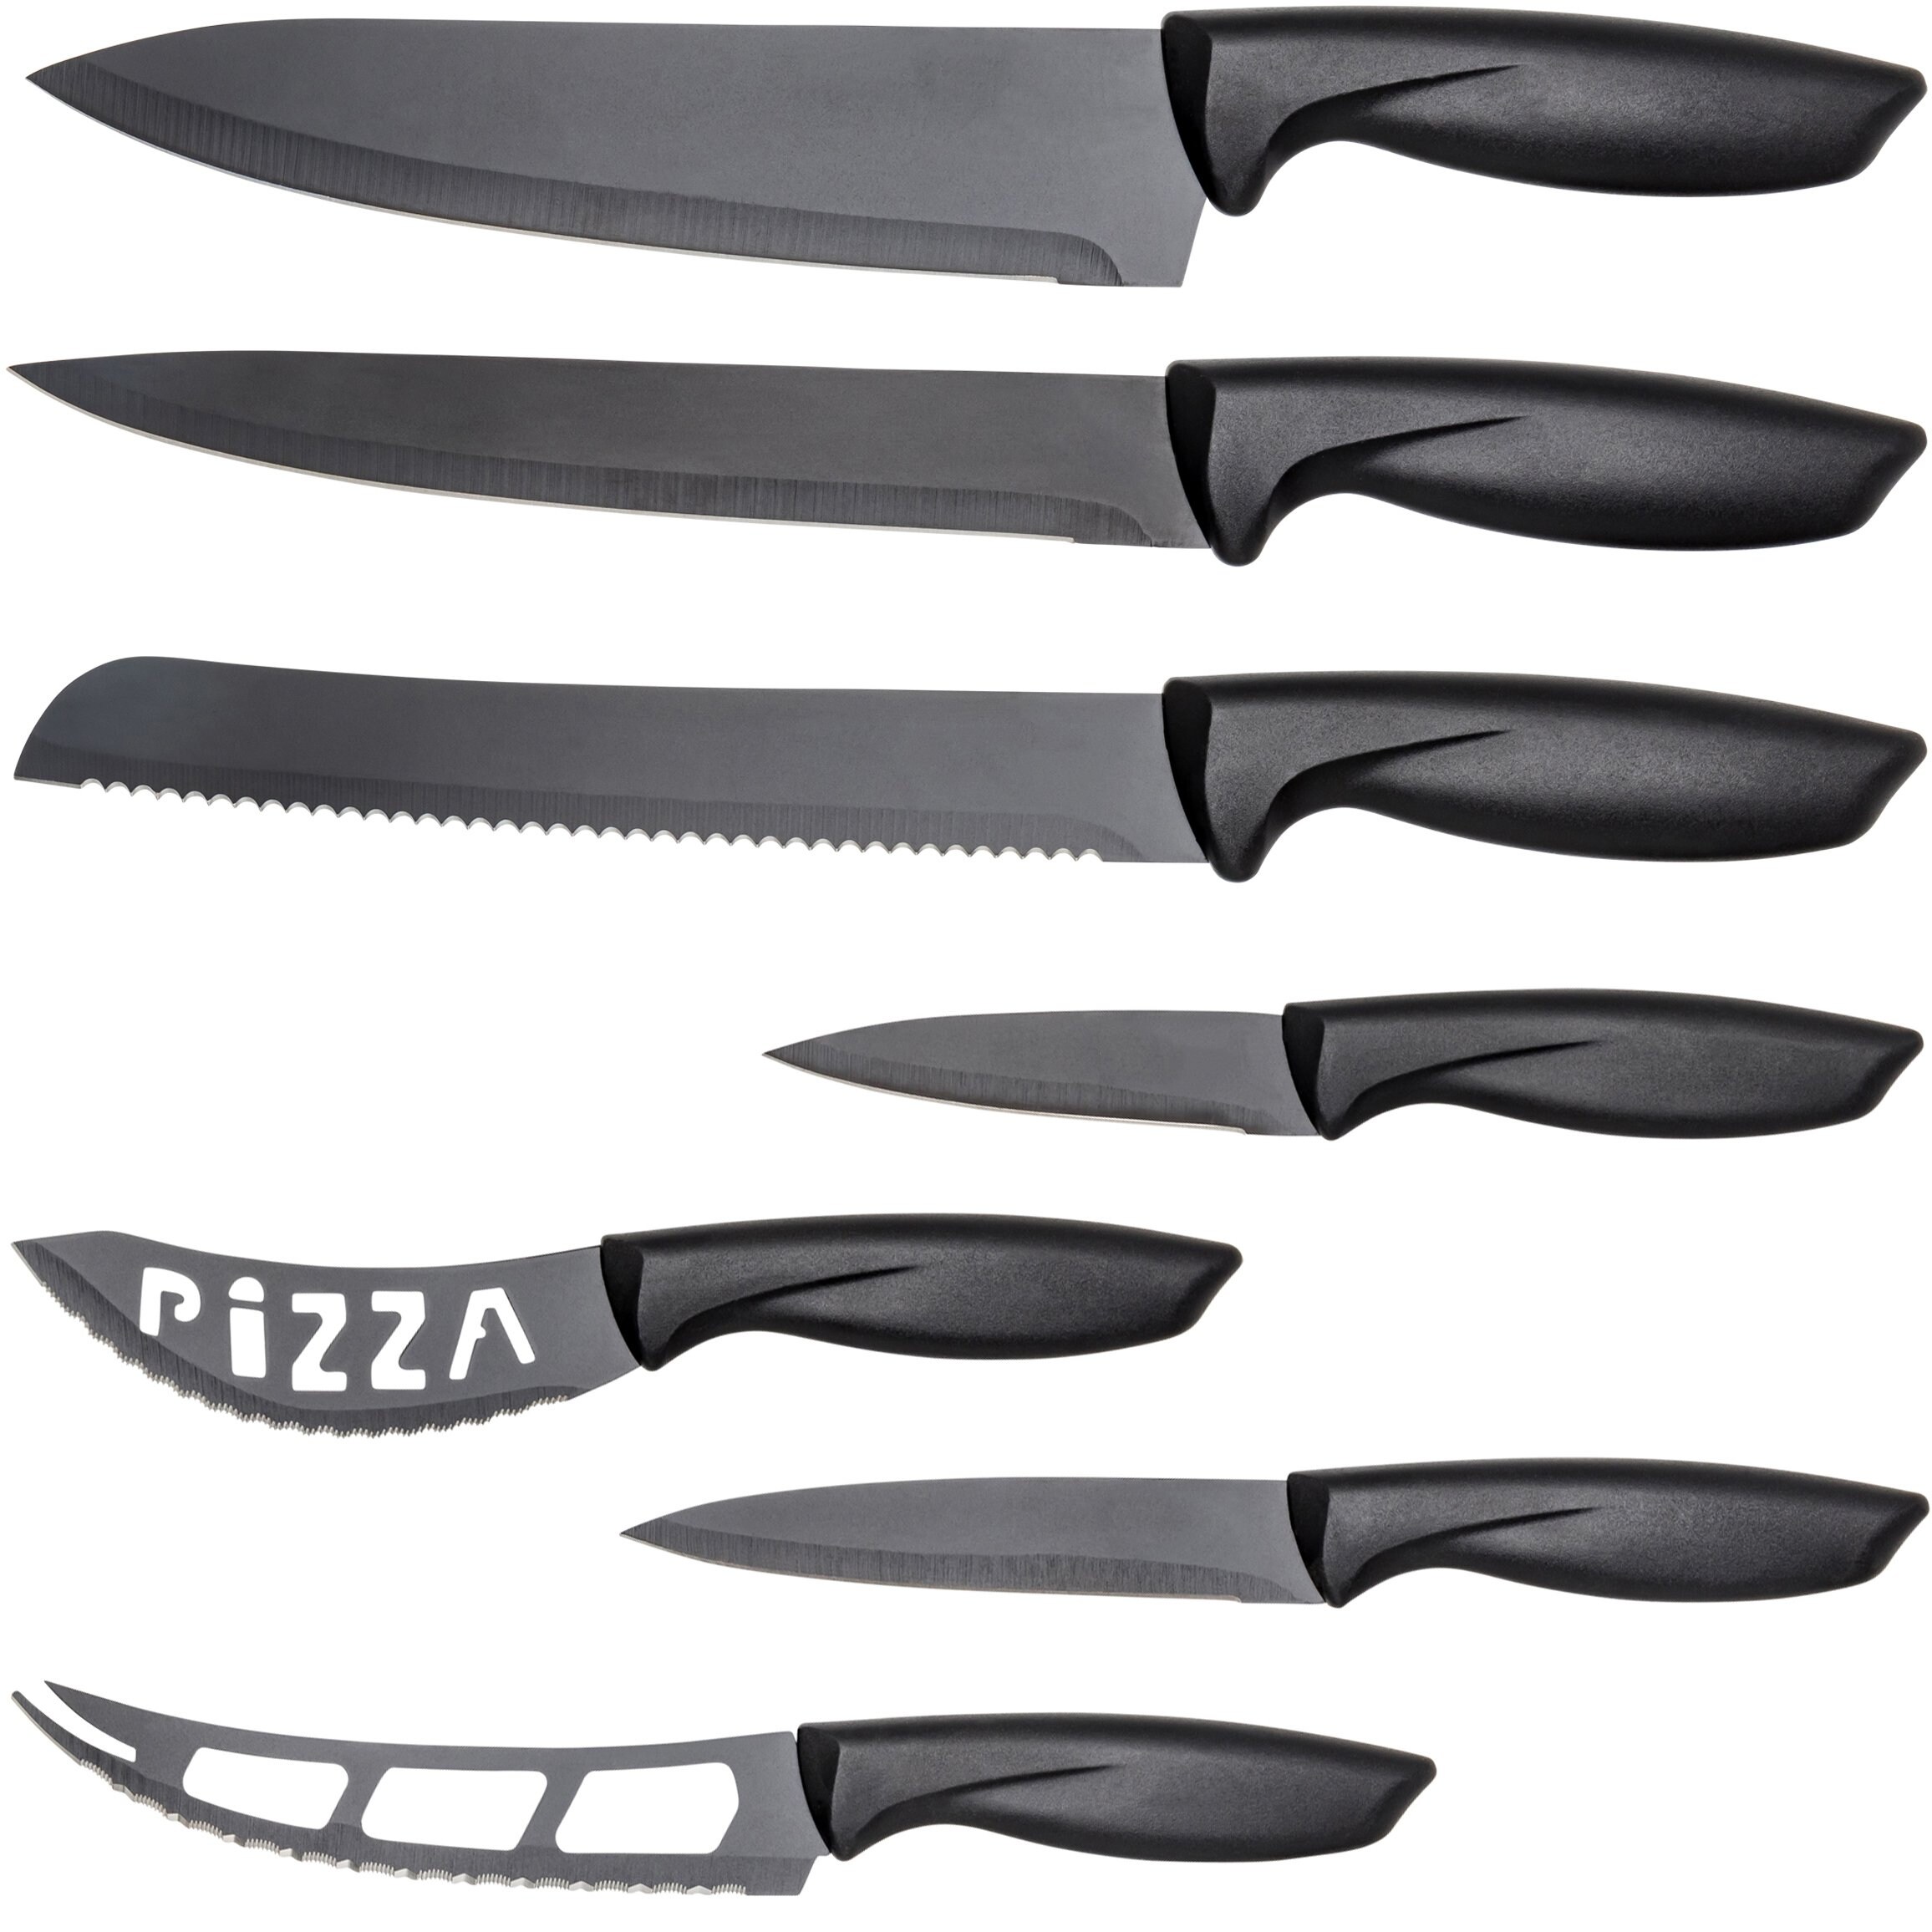 Stainless Steel Multi Use Kitchen Knife Set Set Of 7 Quick Shipping Overstock 29030150